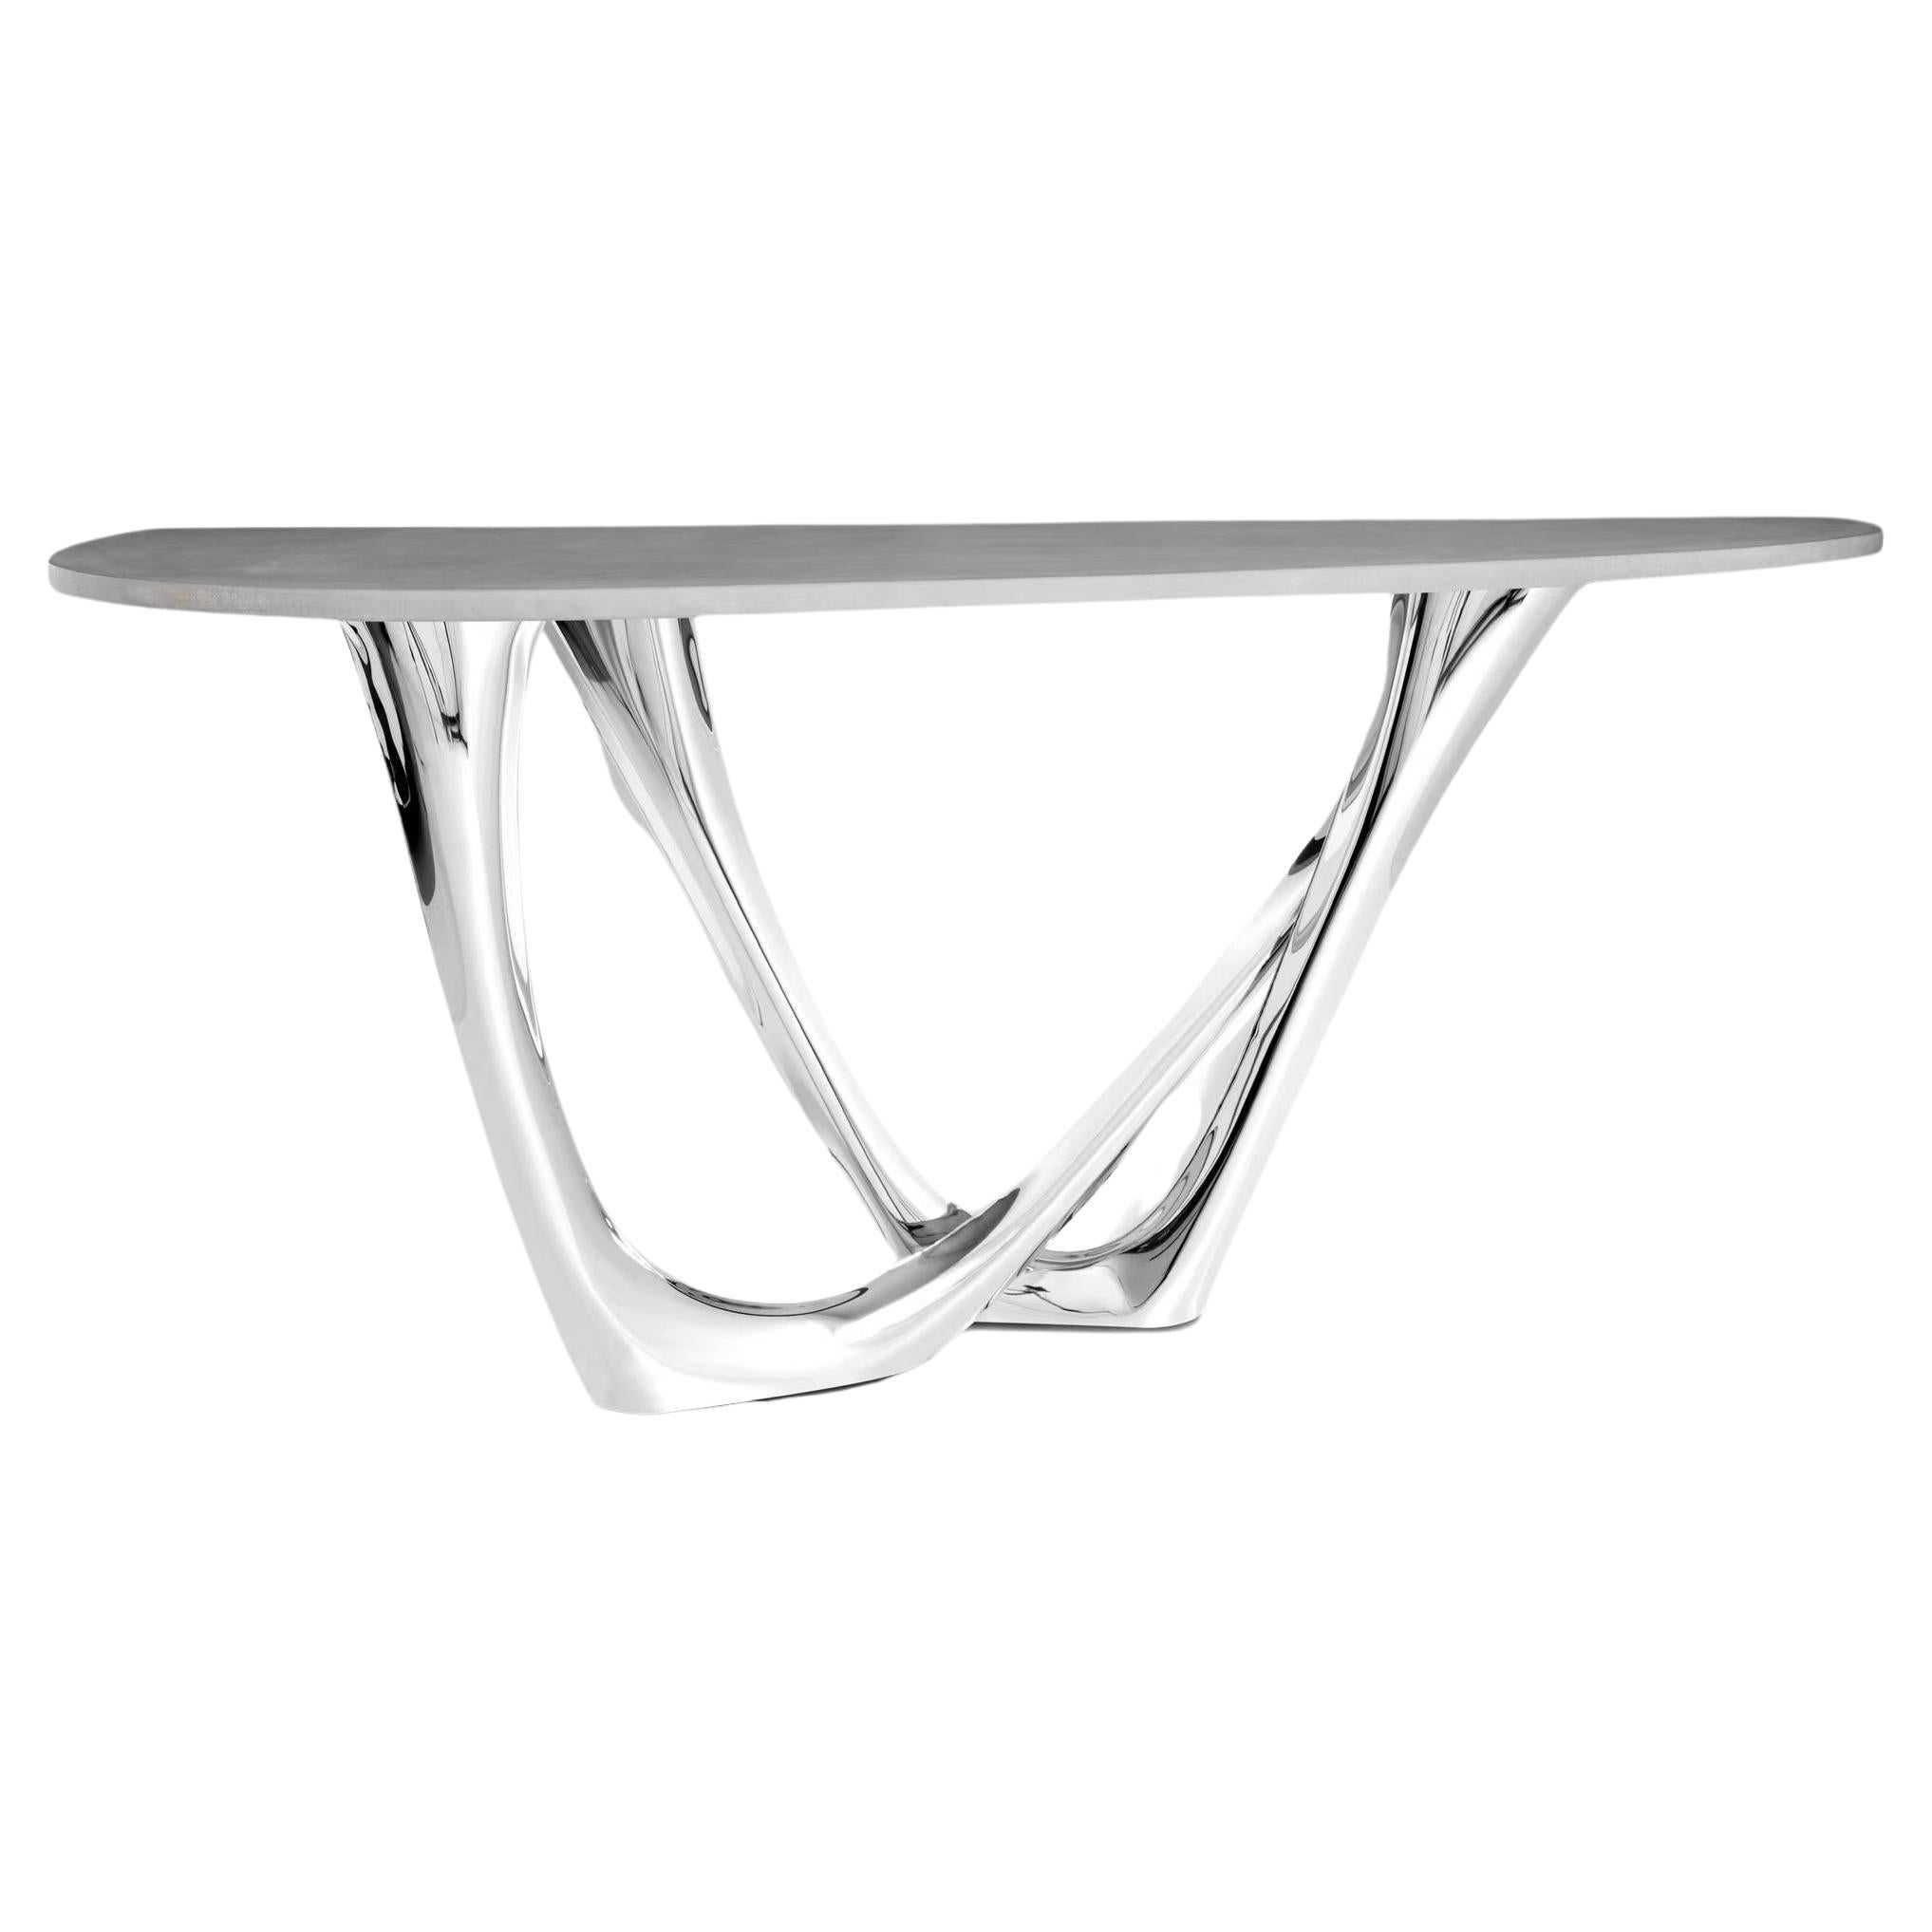 G-Console Duo Concrete Polished Stainless Steel Side Table by Zieta For Sale